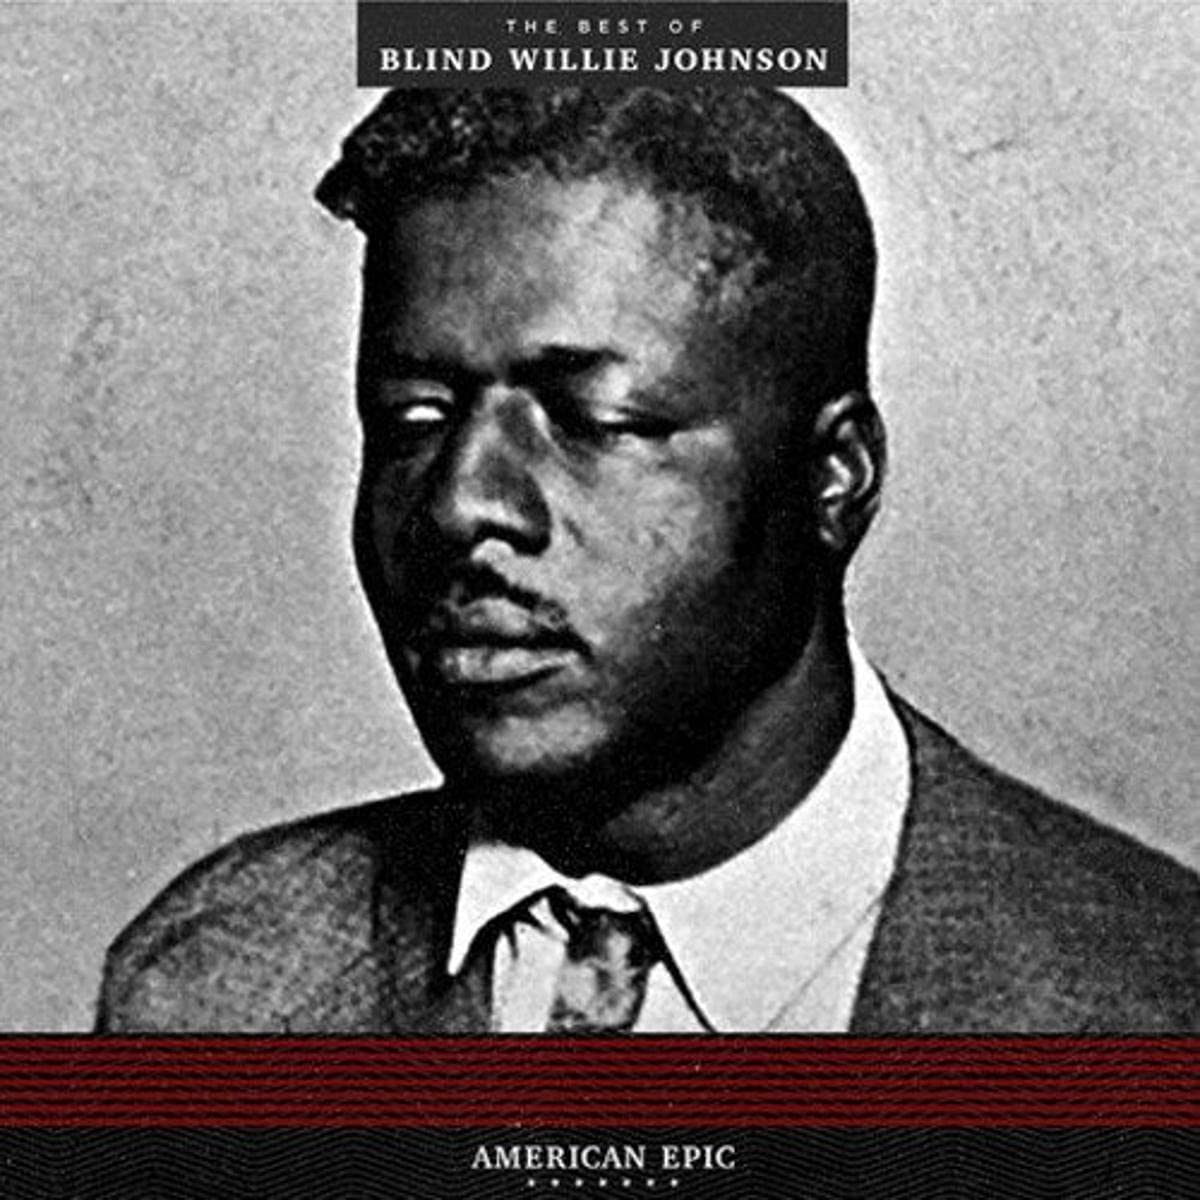 Blind Willie Johnson - American Epic: the Best of Blind Willie Johnson (Vinyl LP)